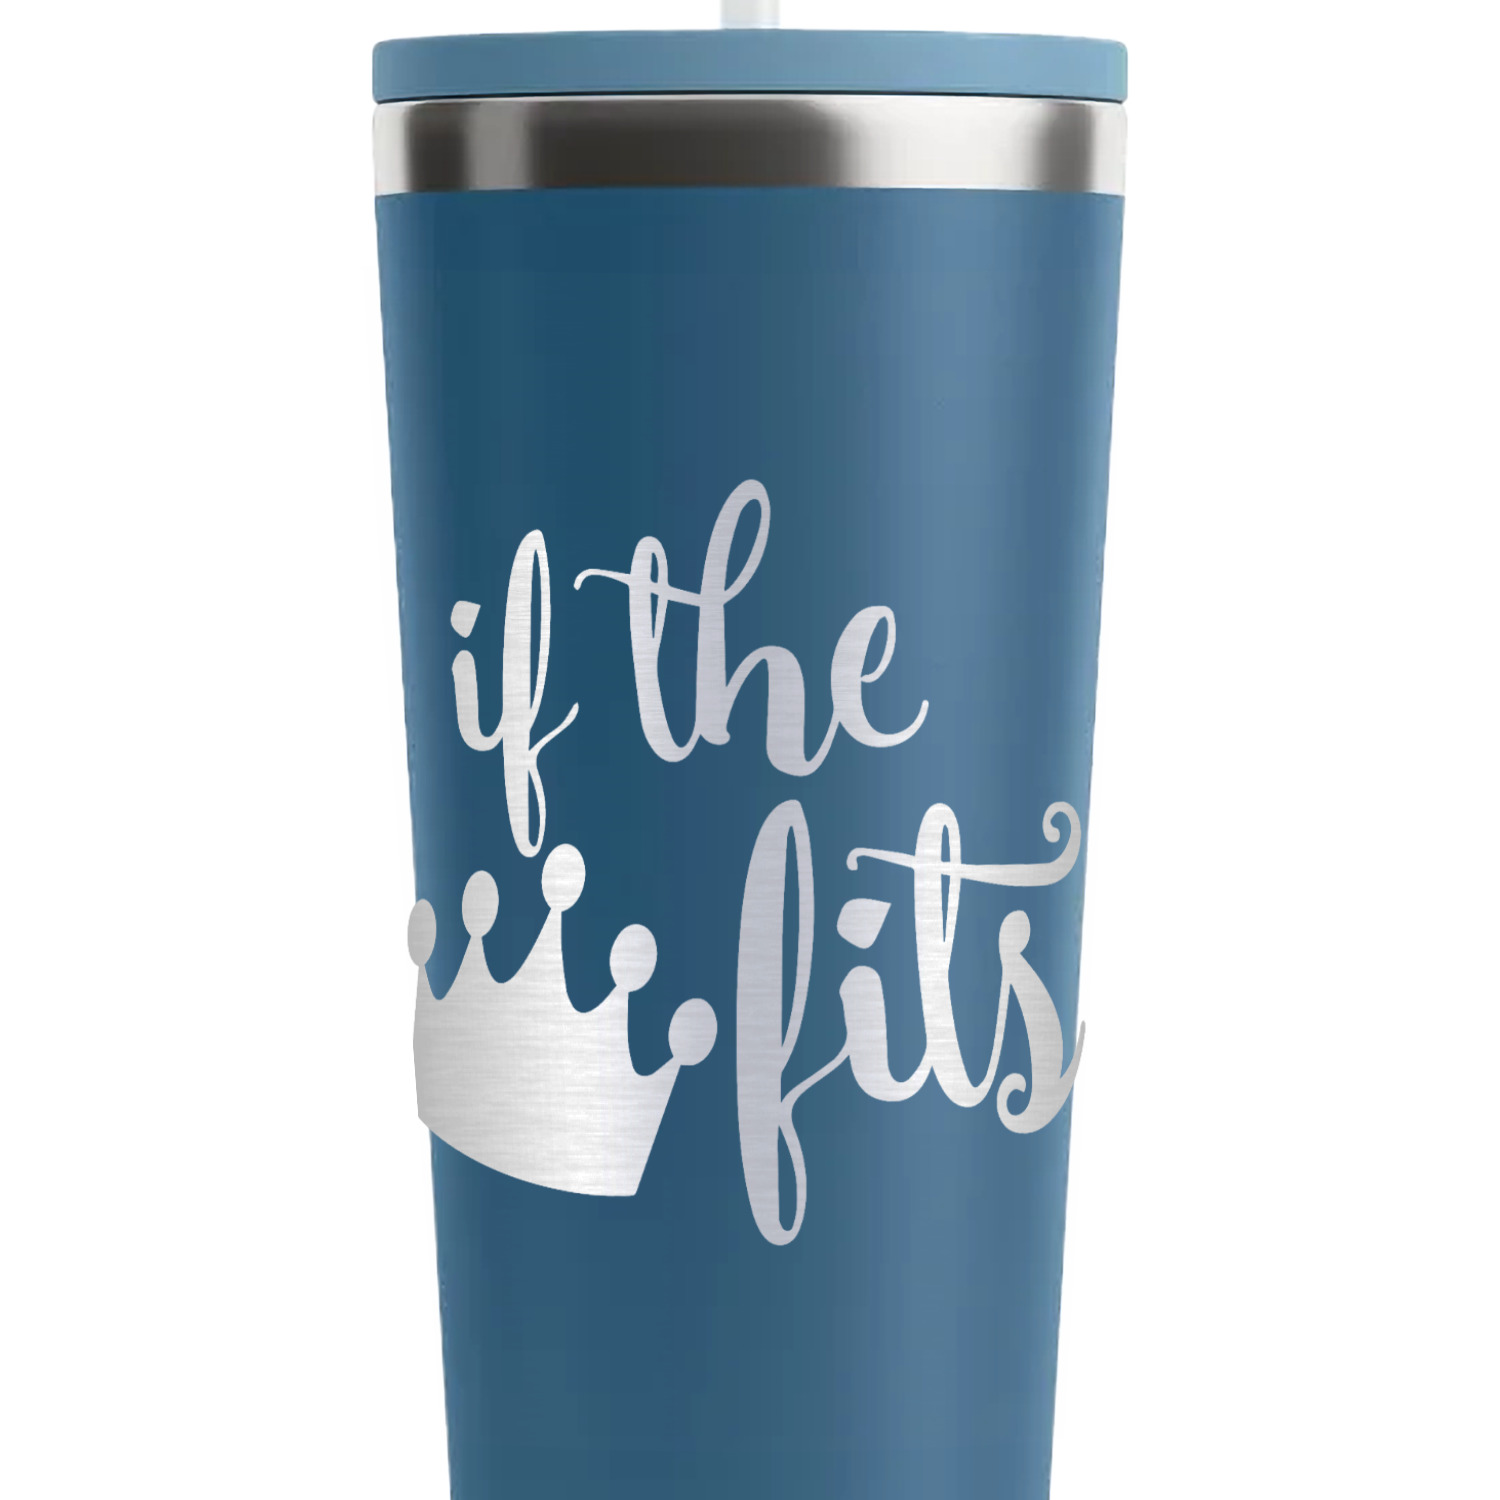 https://www.youcustomizeit.com/common/MAKE/1038314/Princess-Quotes-and-Sayings-Steel-Blue-RTIC-Everyday-Tumbler-28-oz-Close-Up.jpg?lm=1698260632